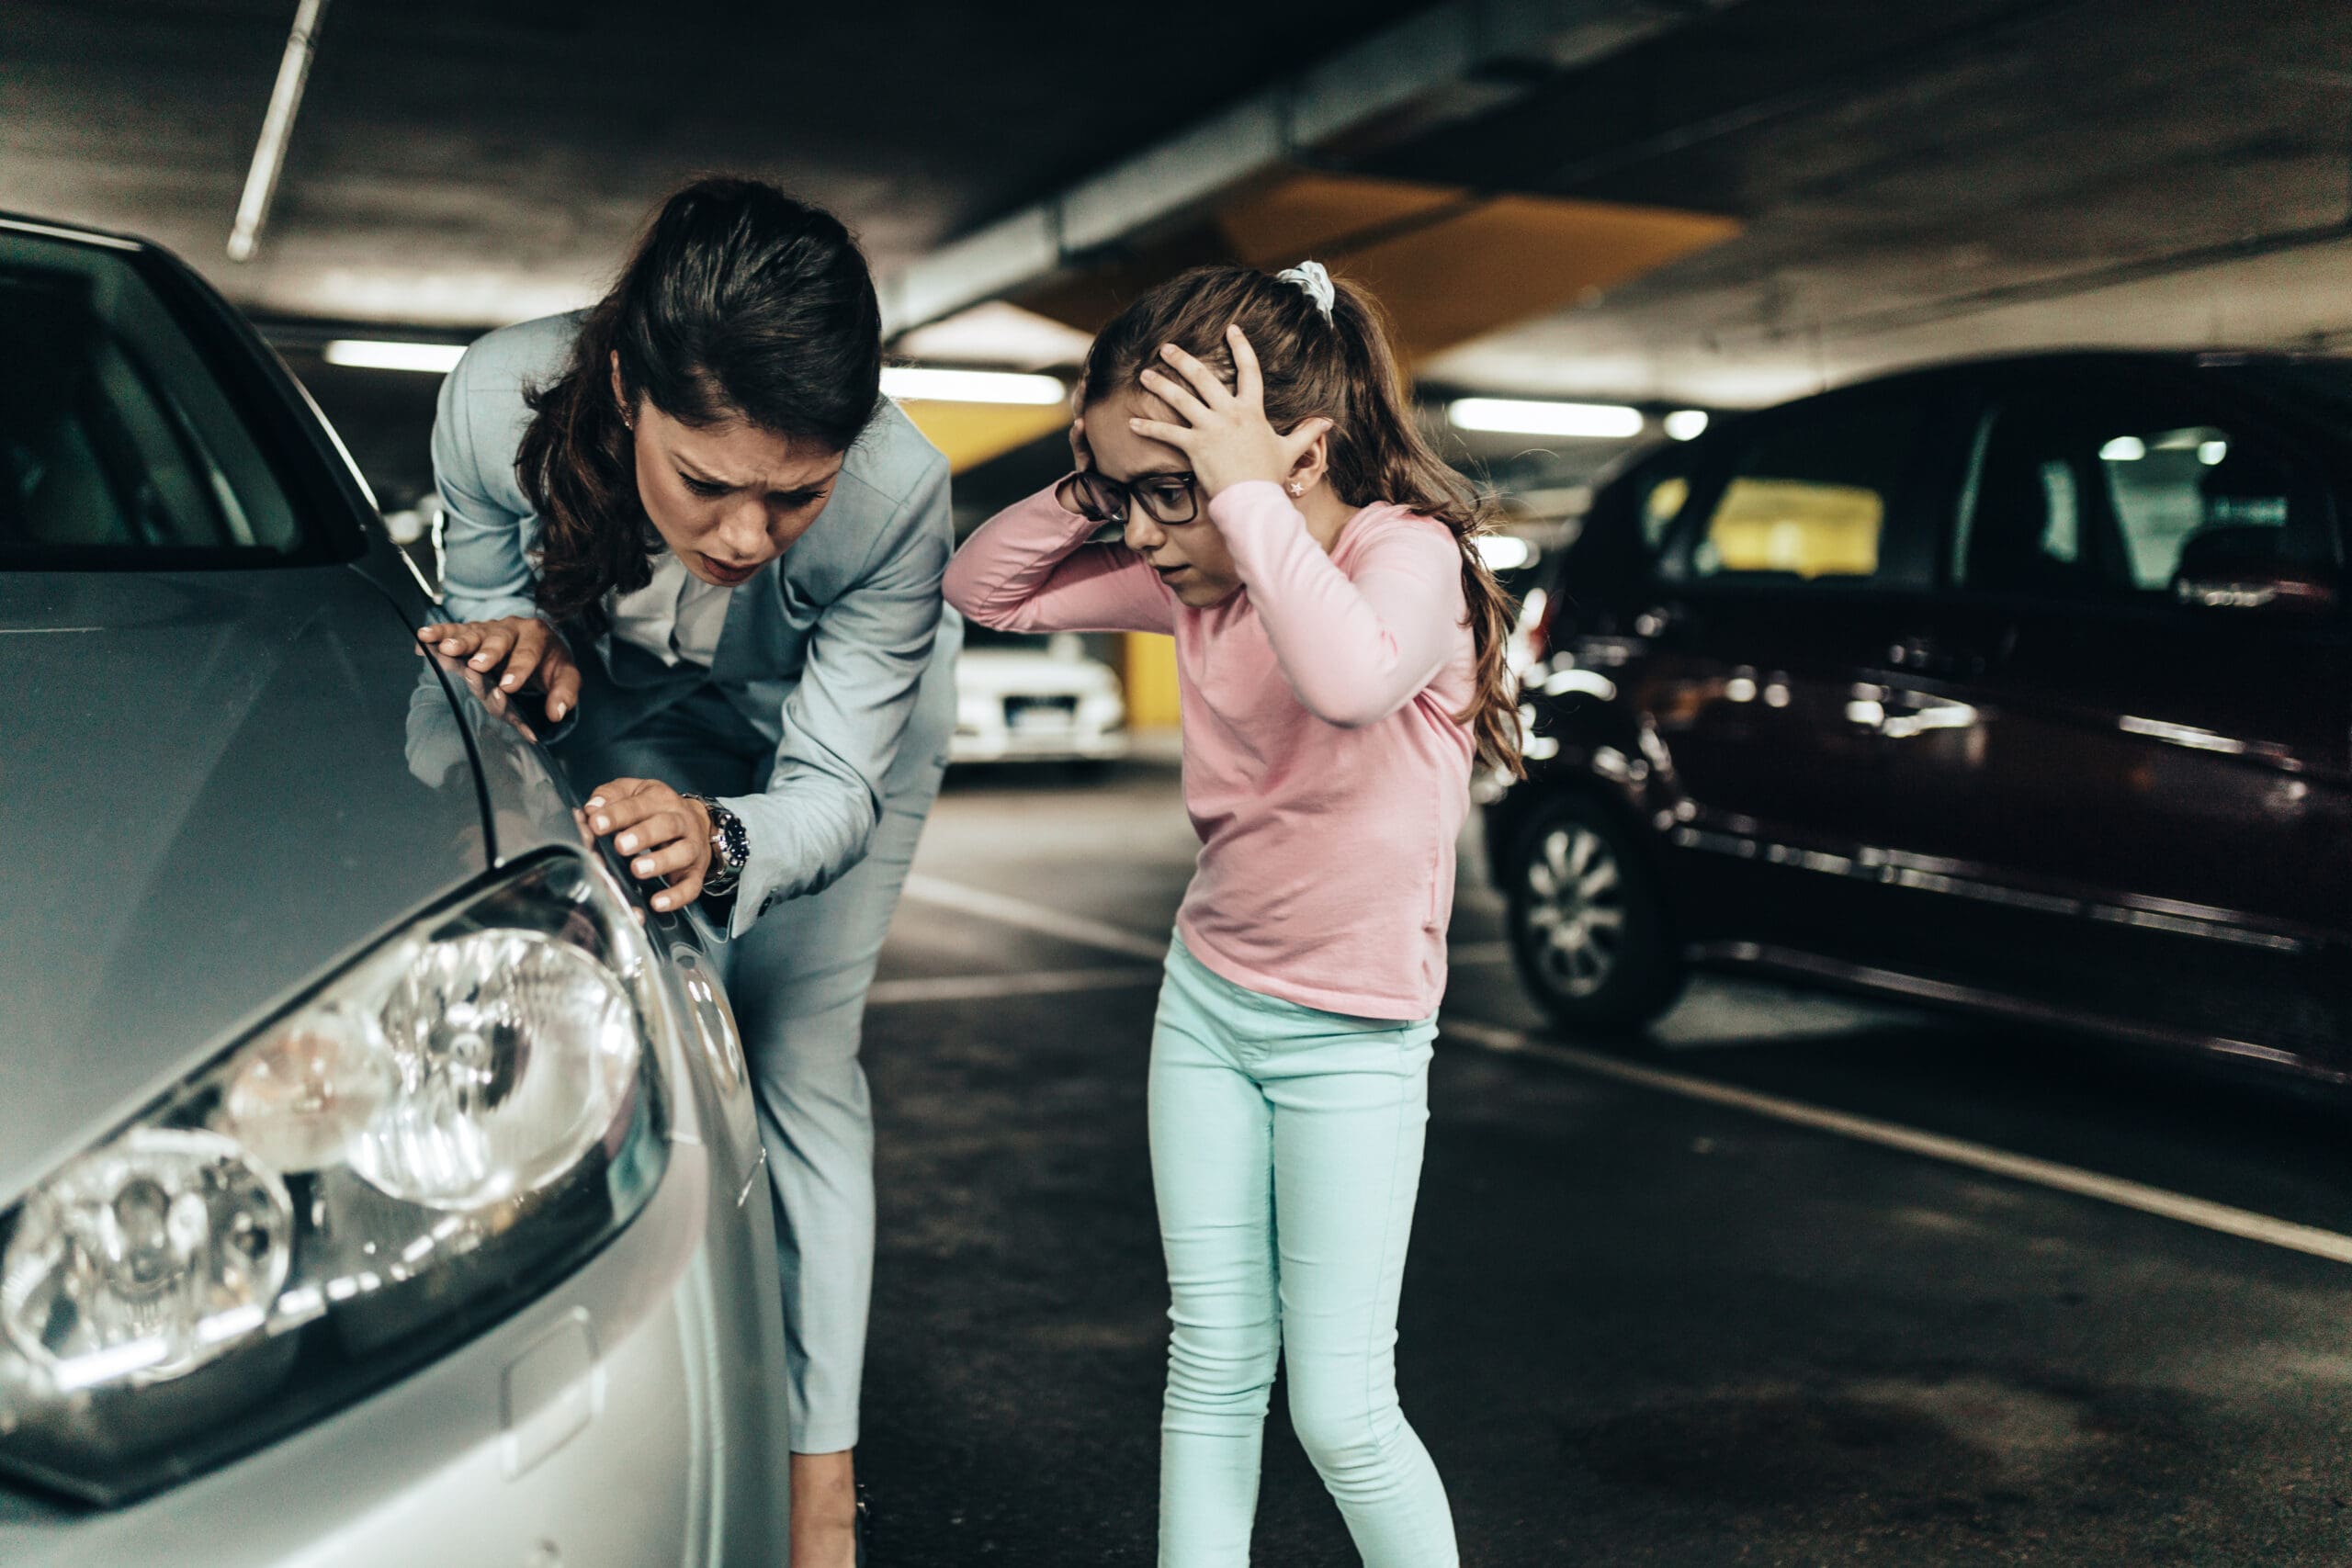 Mother and daughter frustrated at damage to parked car